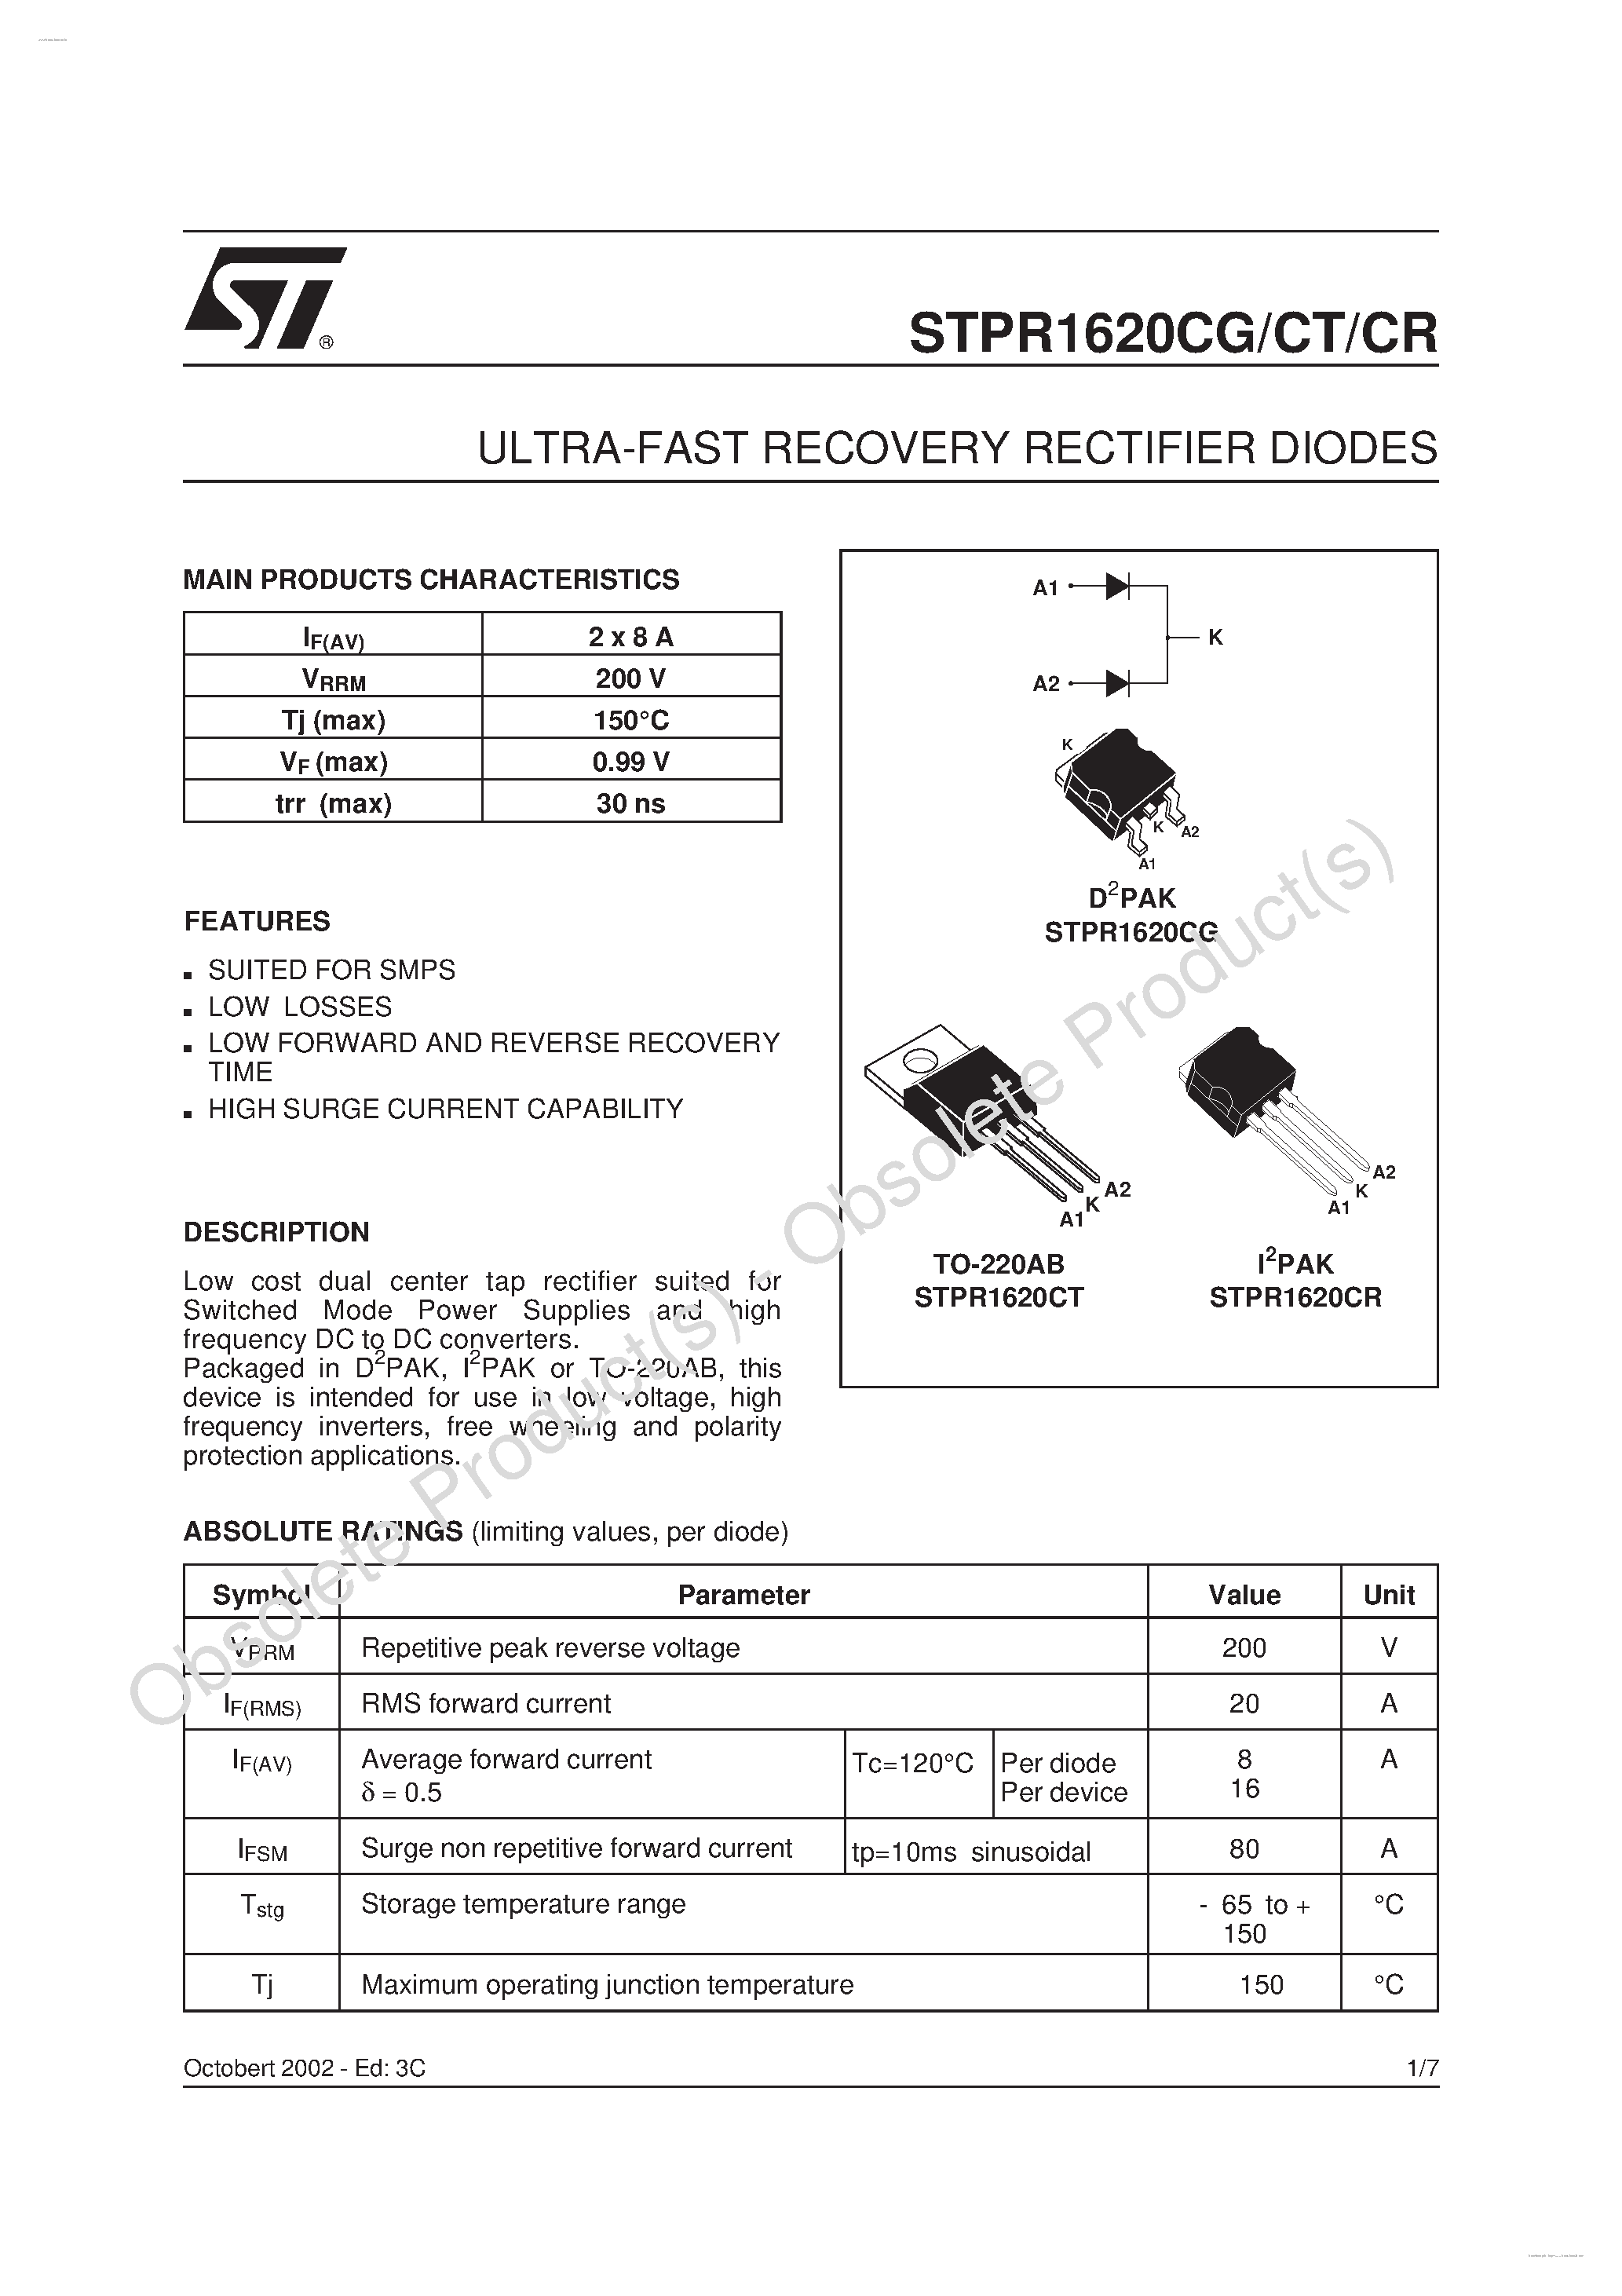 Datasheet STPR1620CG - ULTRA-FAST RECOVERY RECTIFIER DIODES page 1